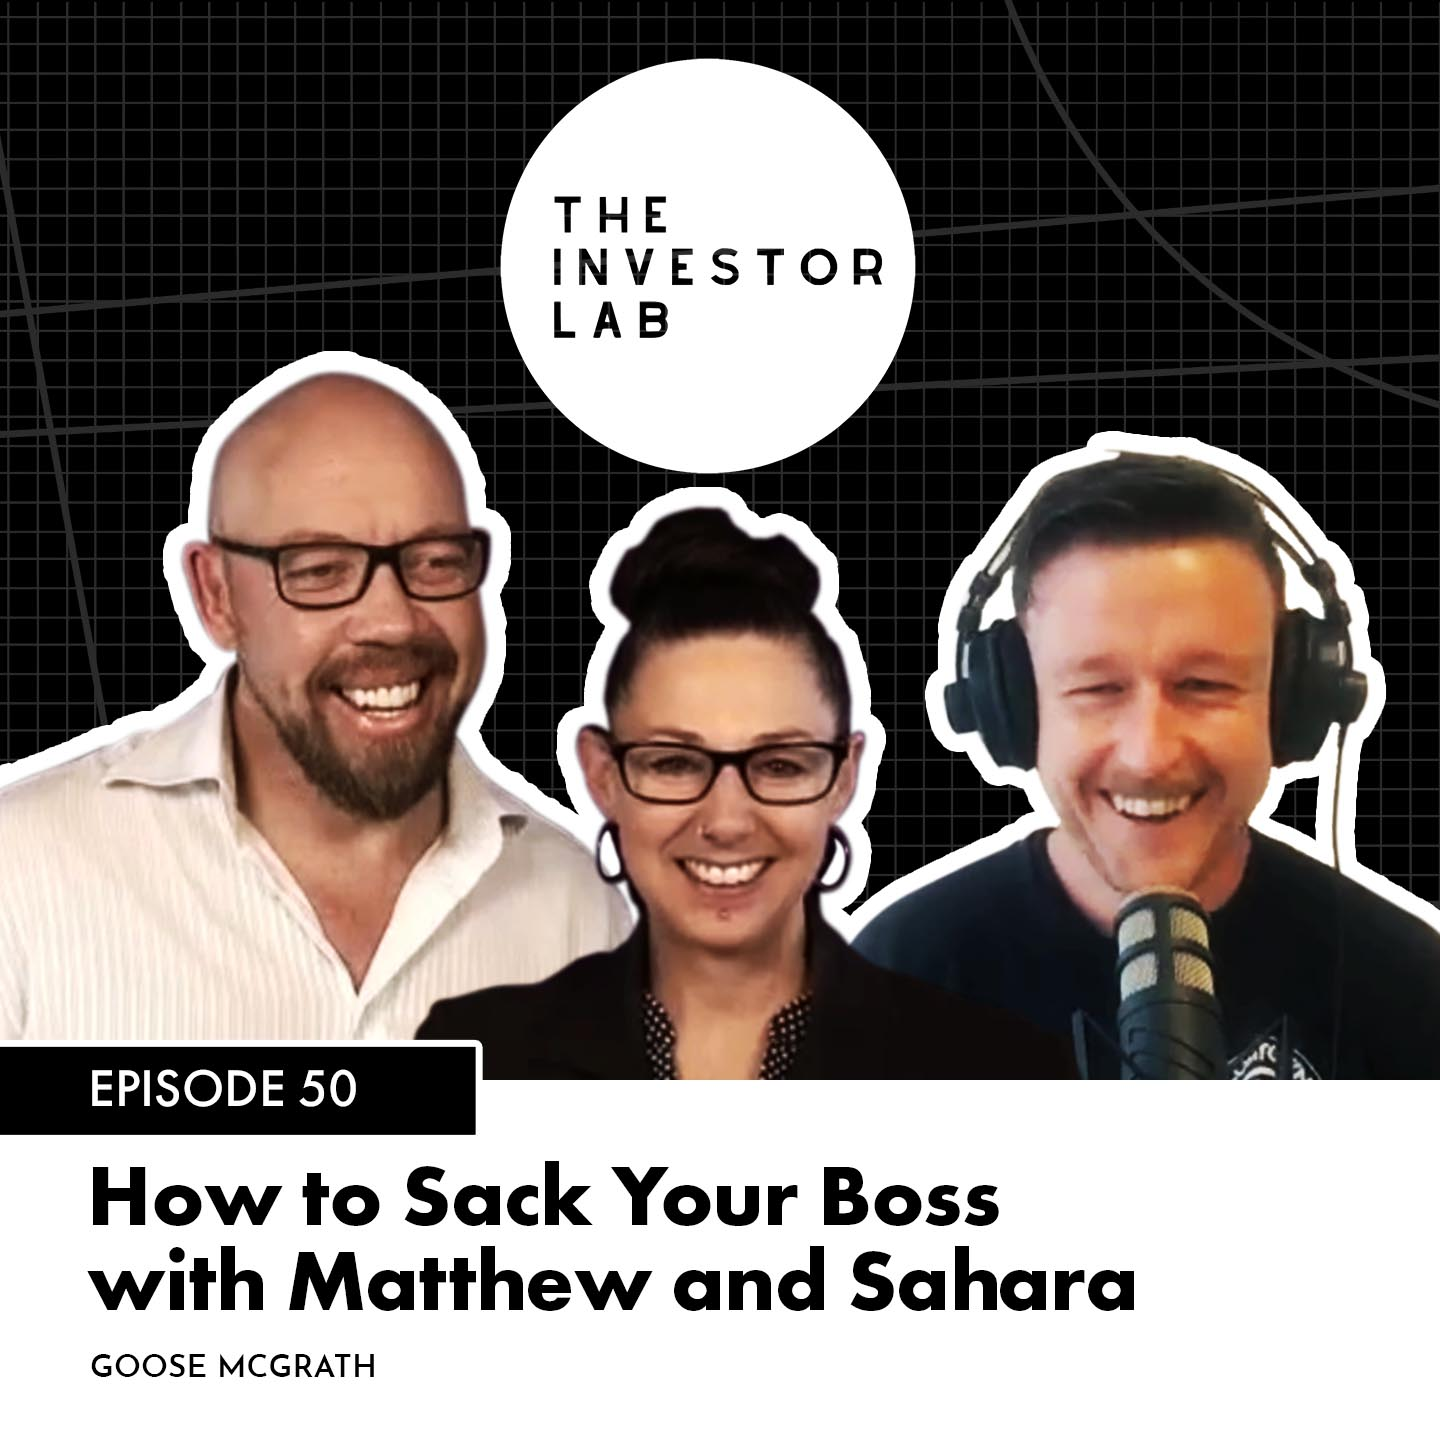 How to Sack Your Boss with Matthew and Sahara